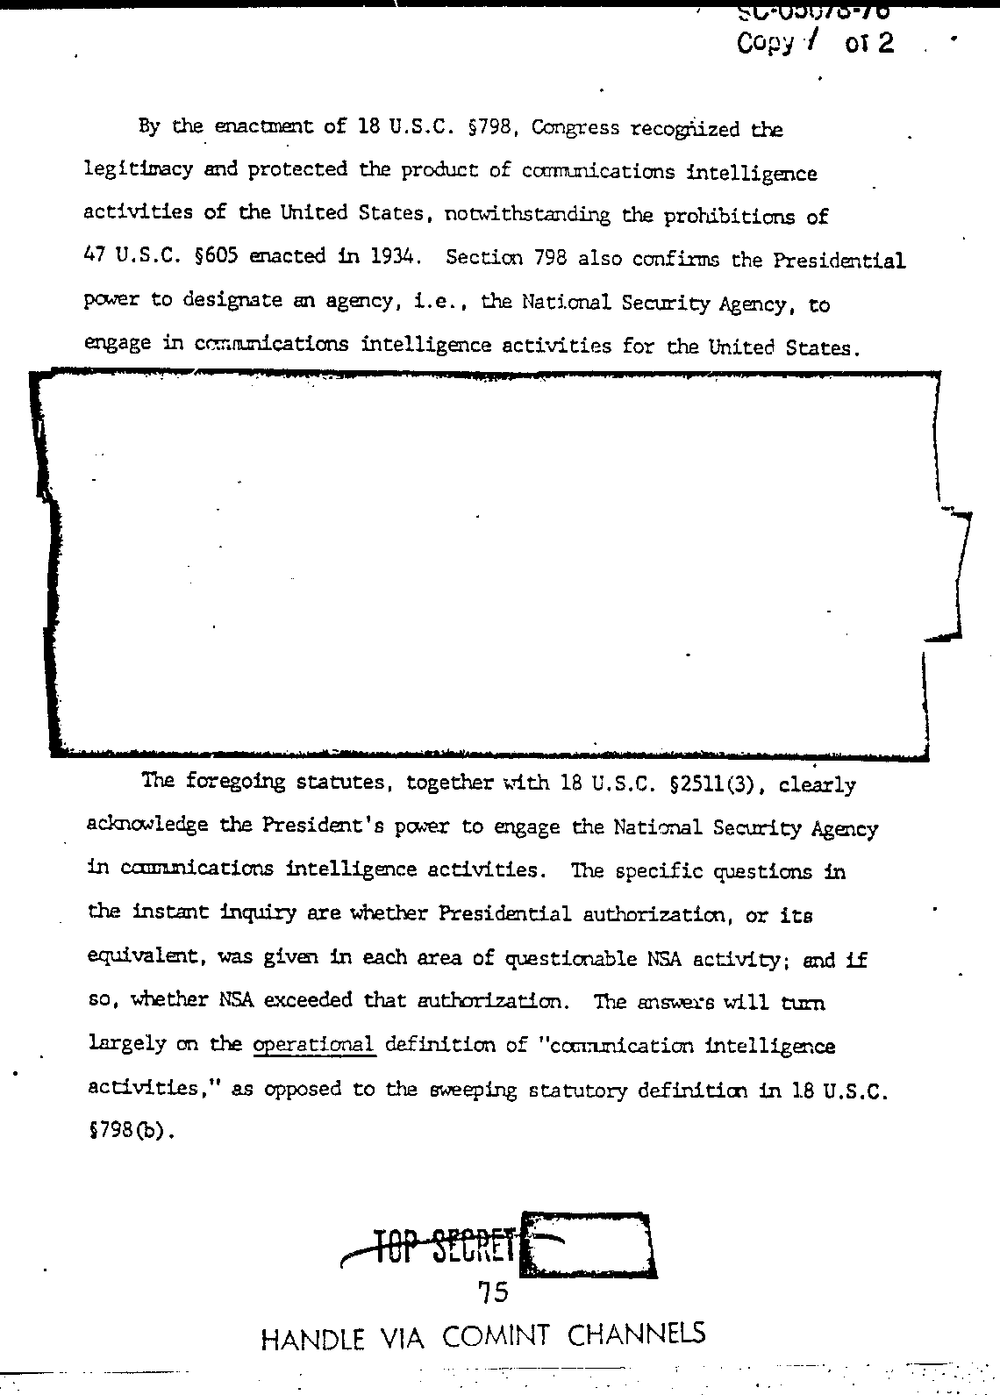 Page 83 from Report on Inquiry Into CIA Related Electronic Surveillance Activities